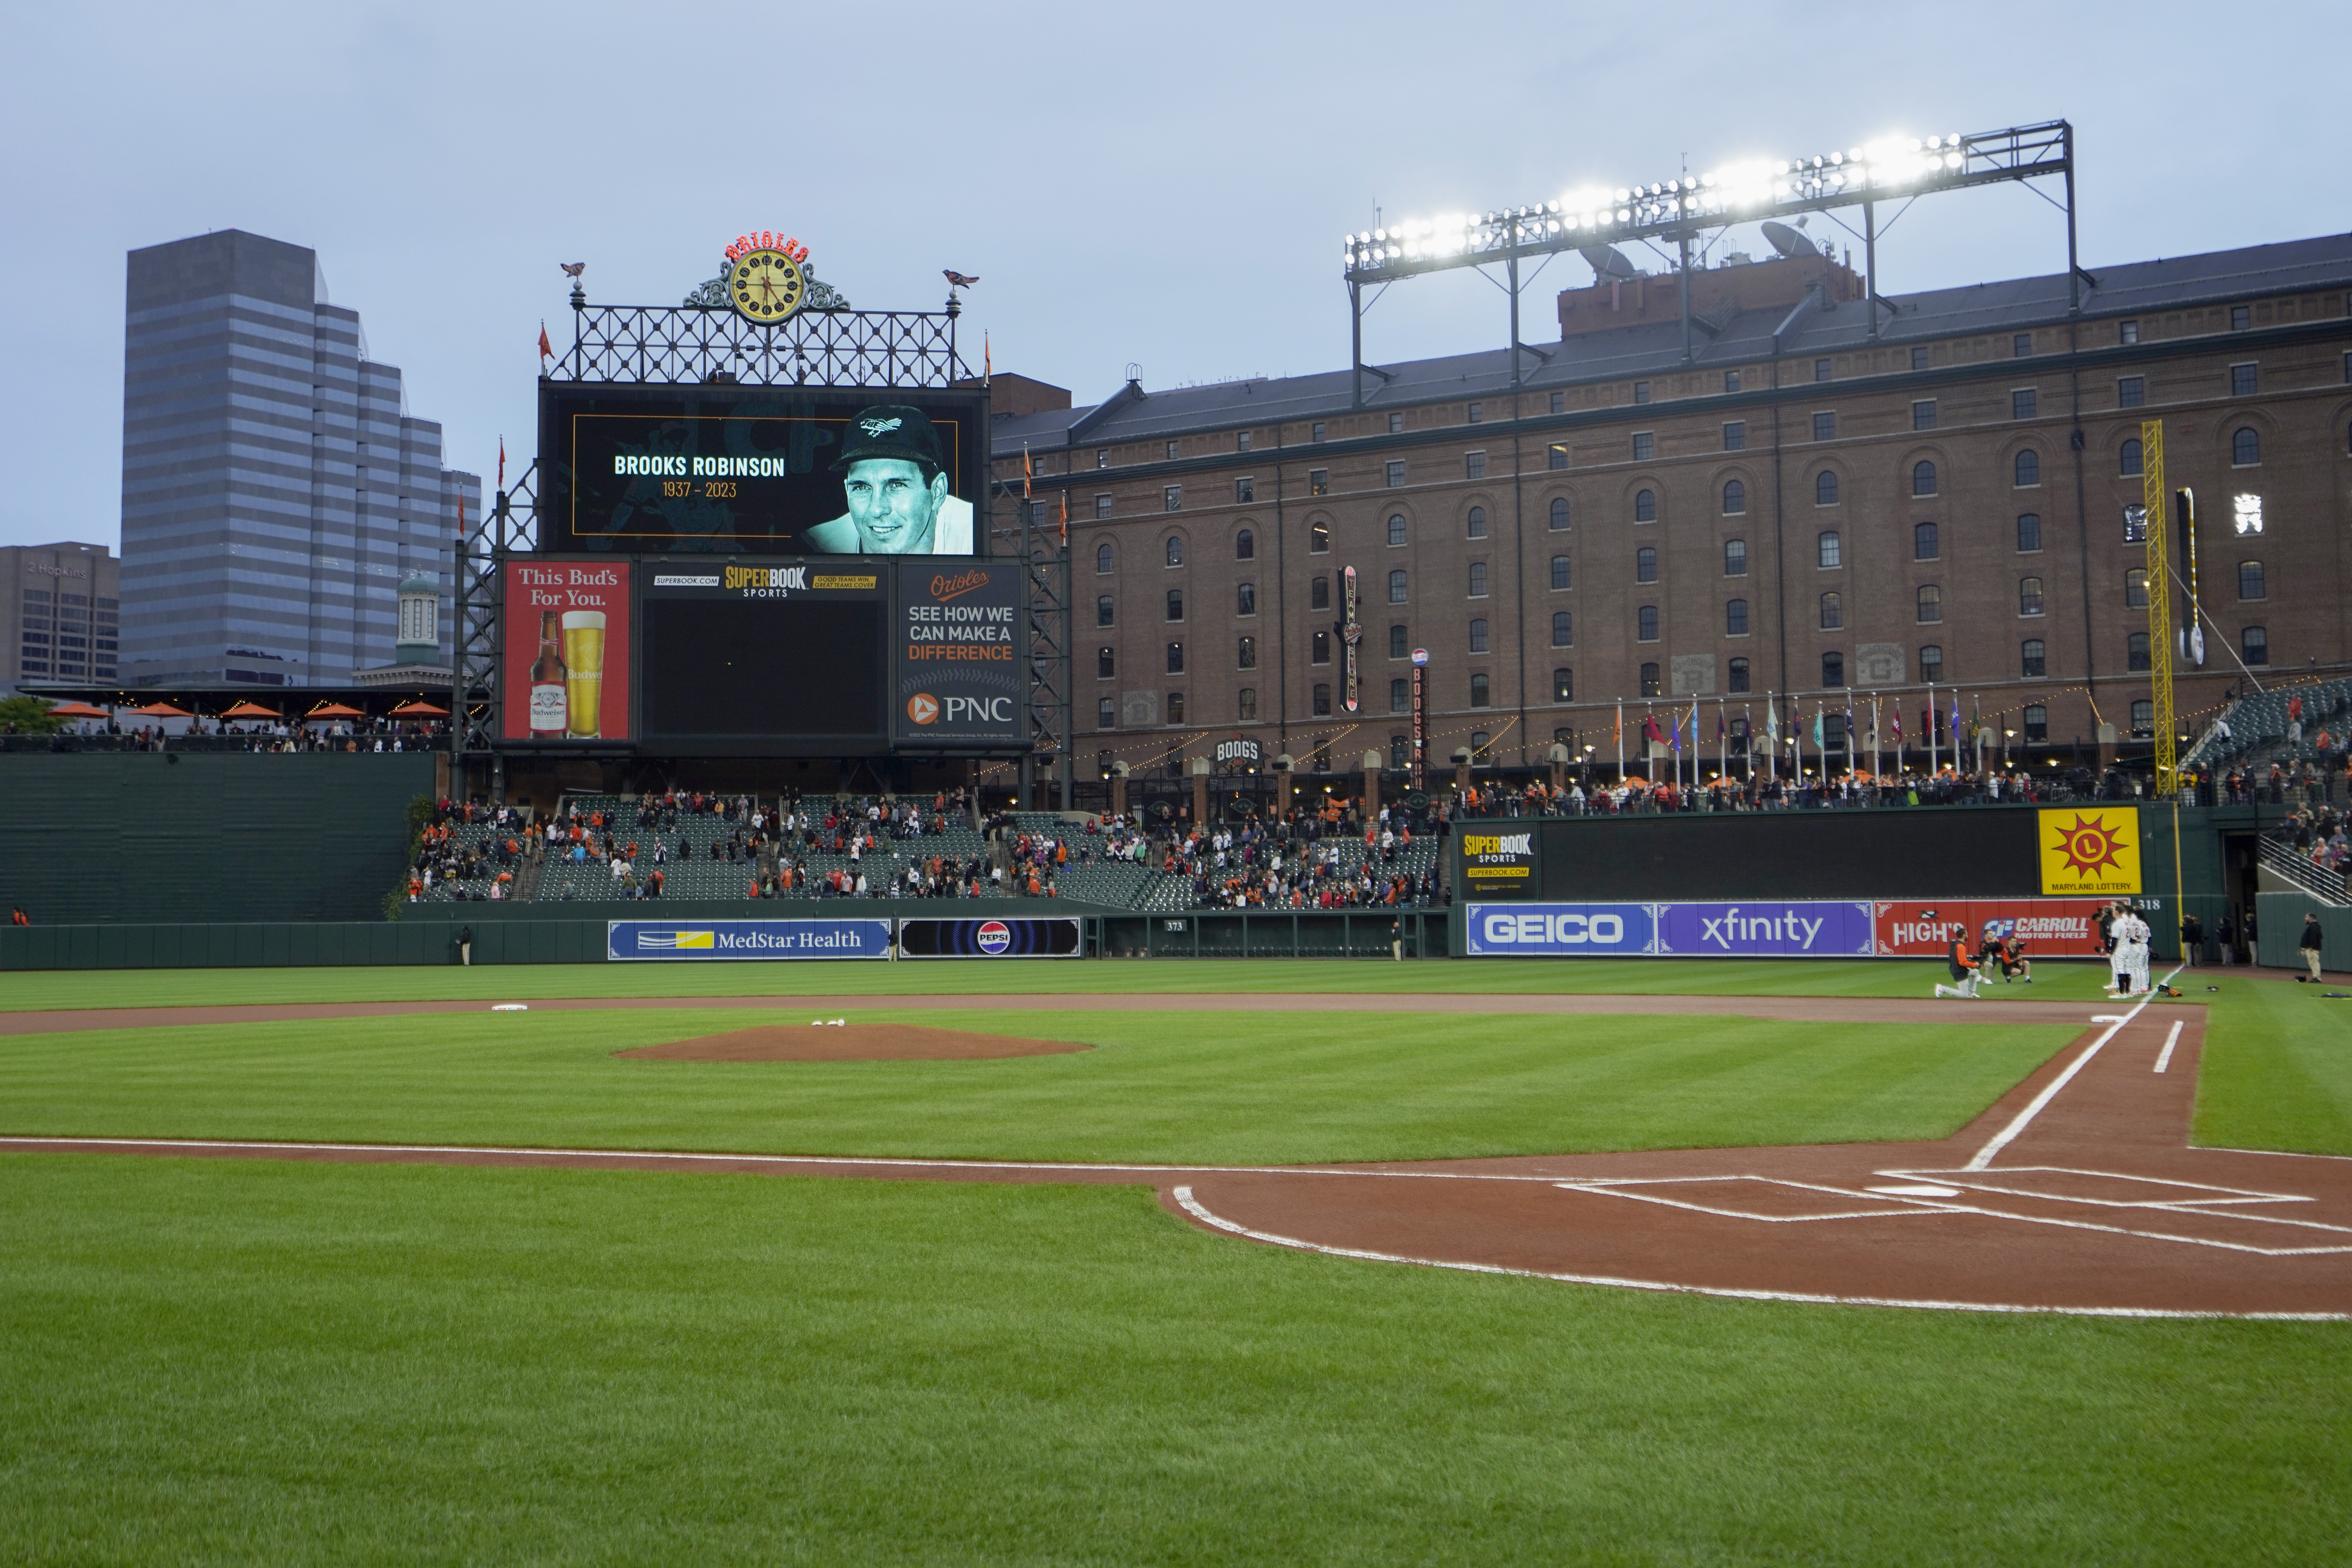 Orioles announce new 30-year deal to stay at Camden Yards - The